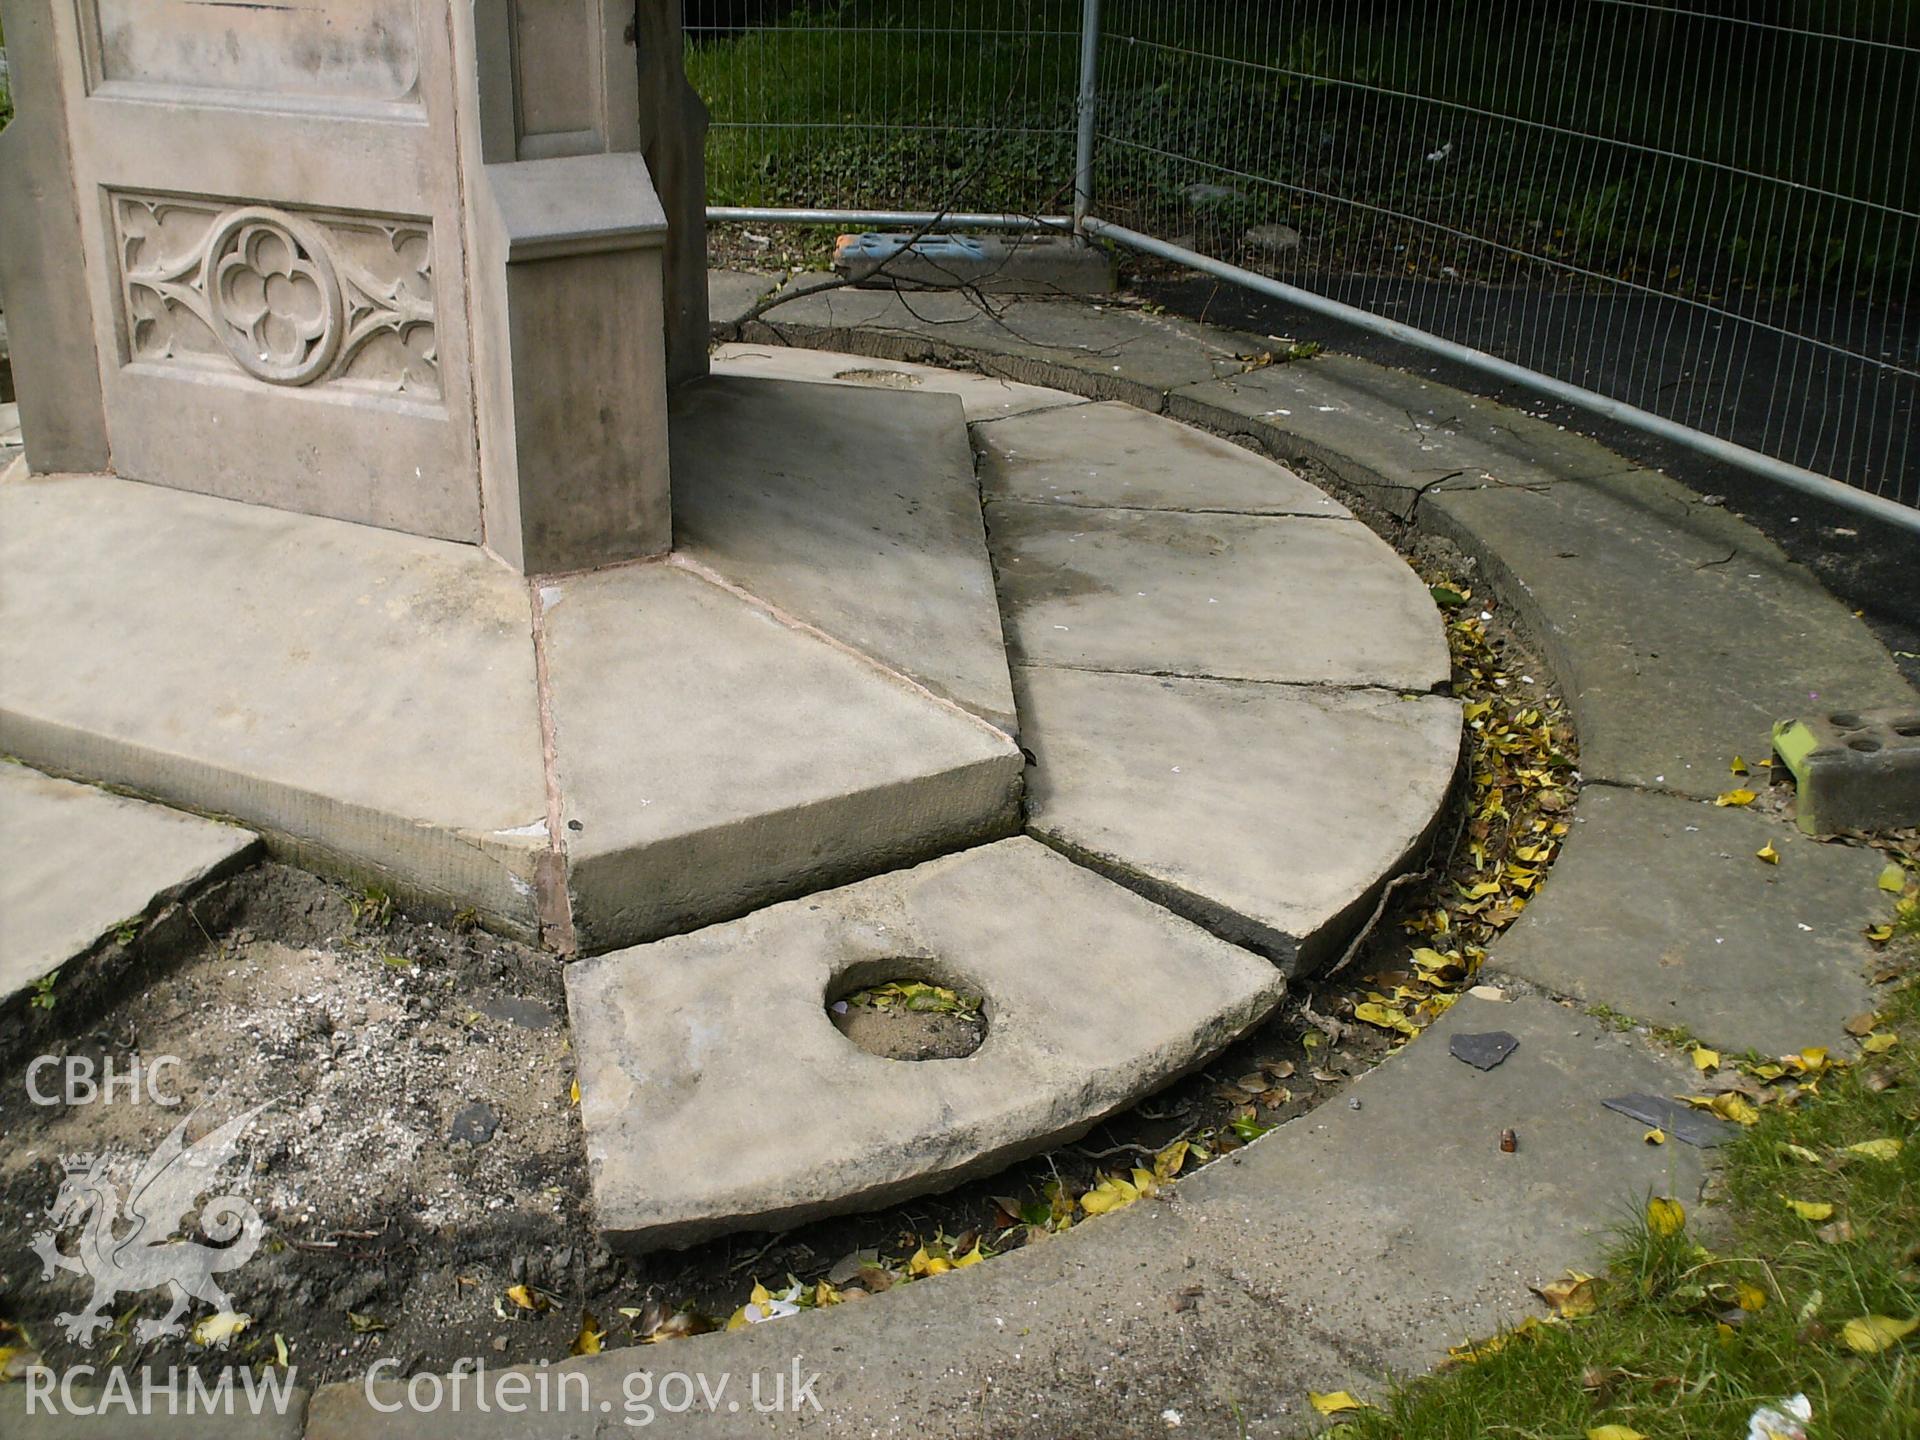 Digital image showing the kerb stones being removed, and the paving being restored.